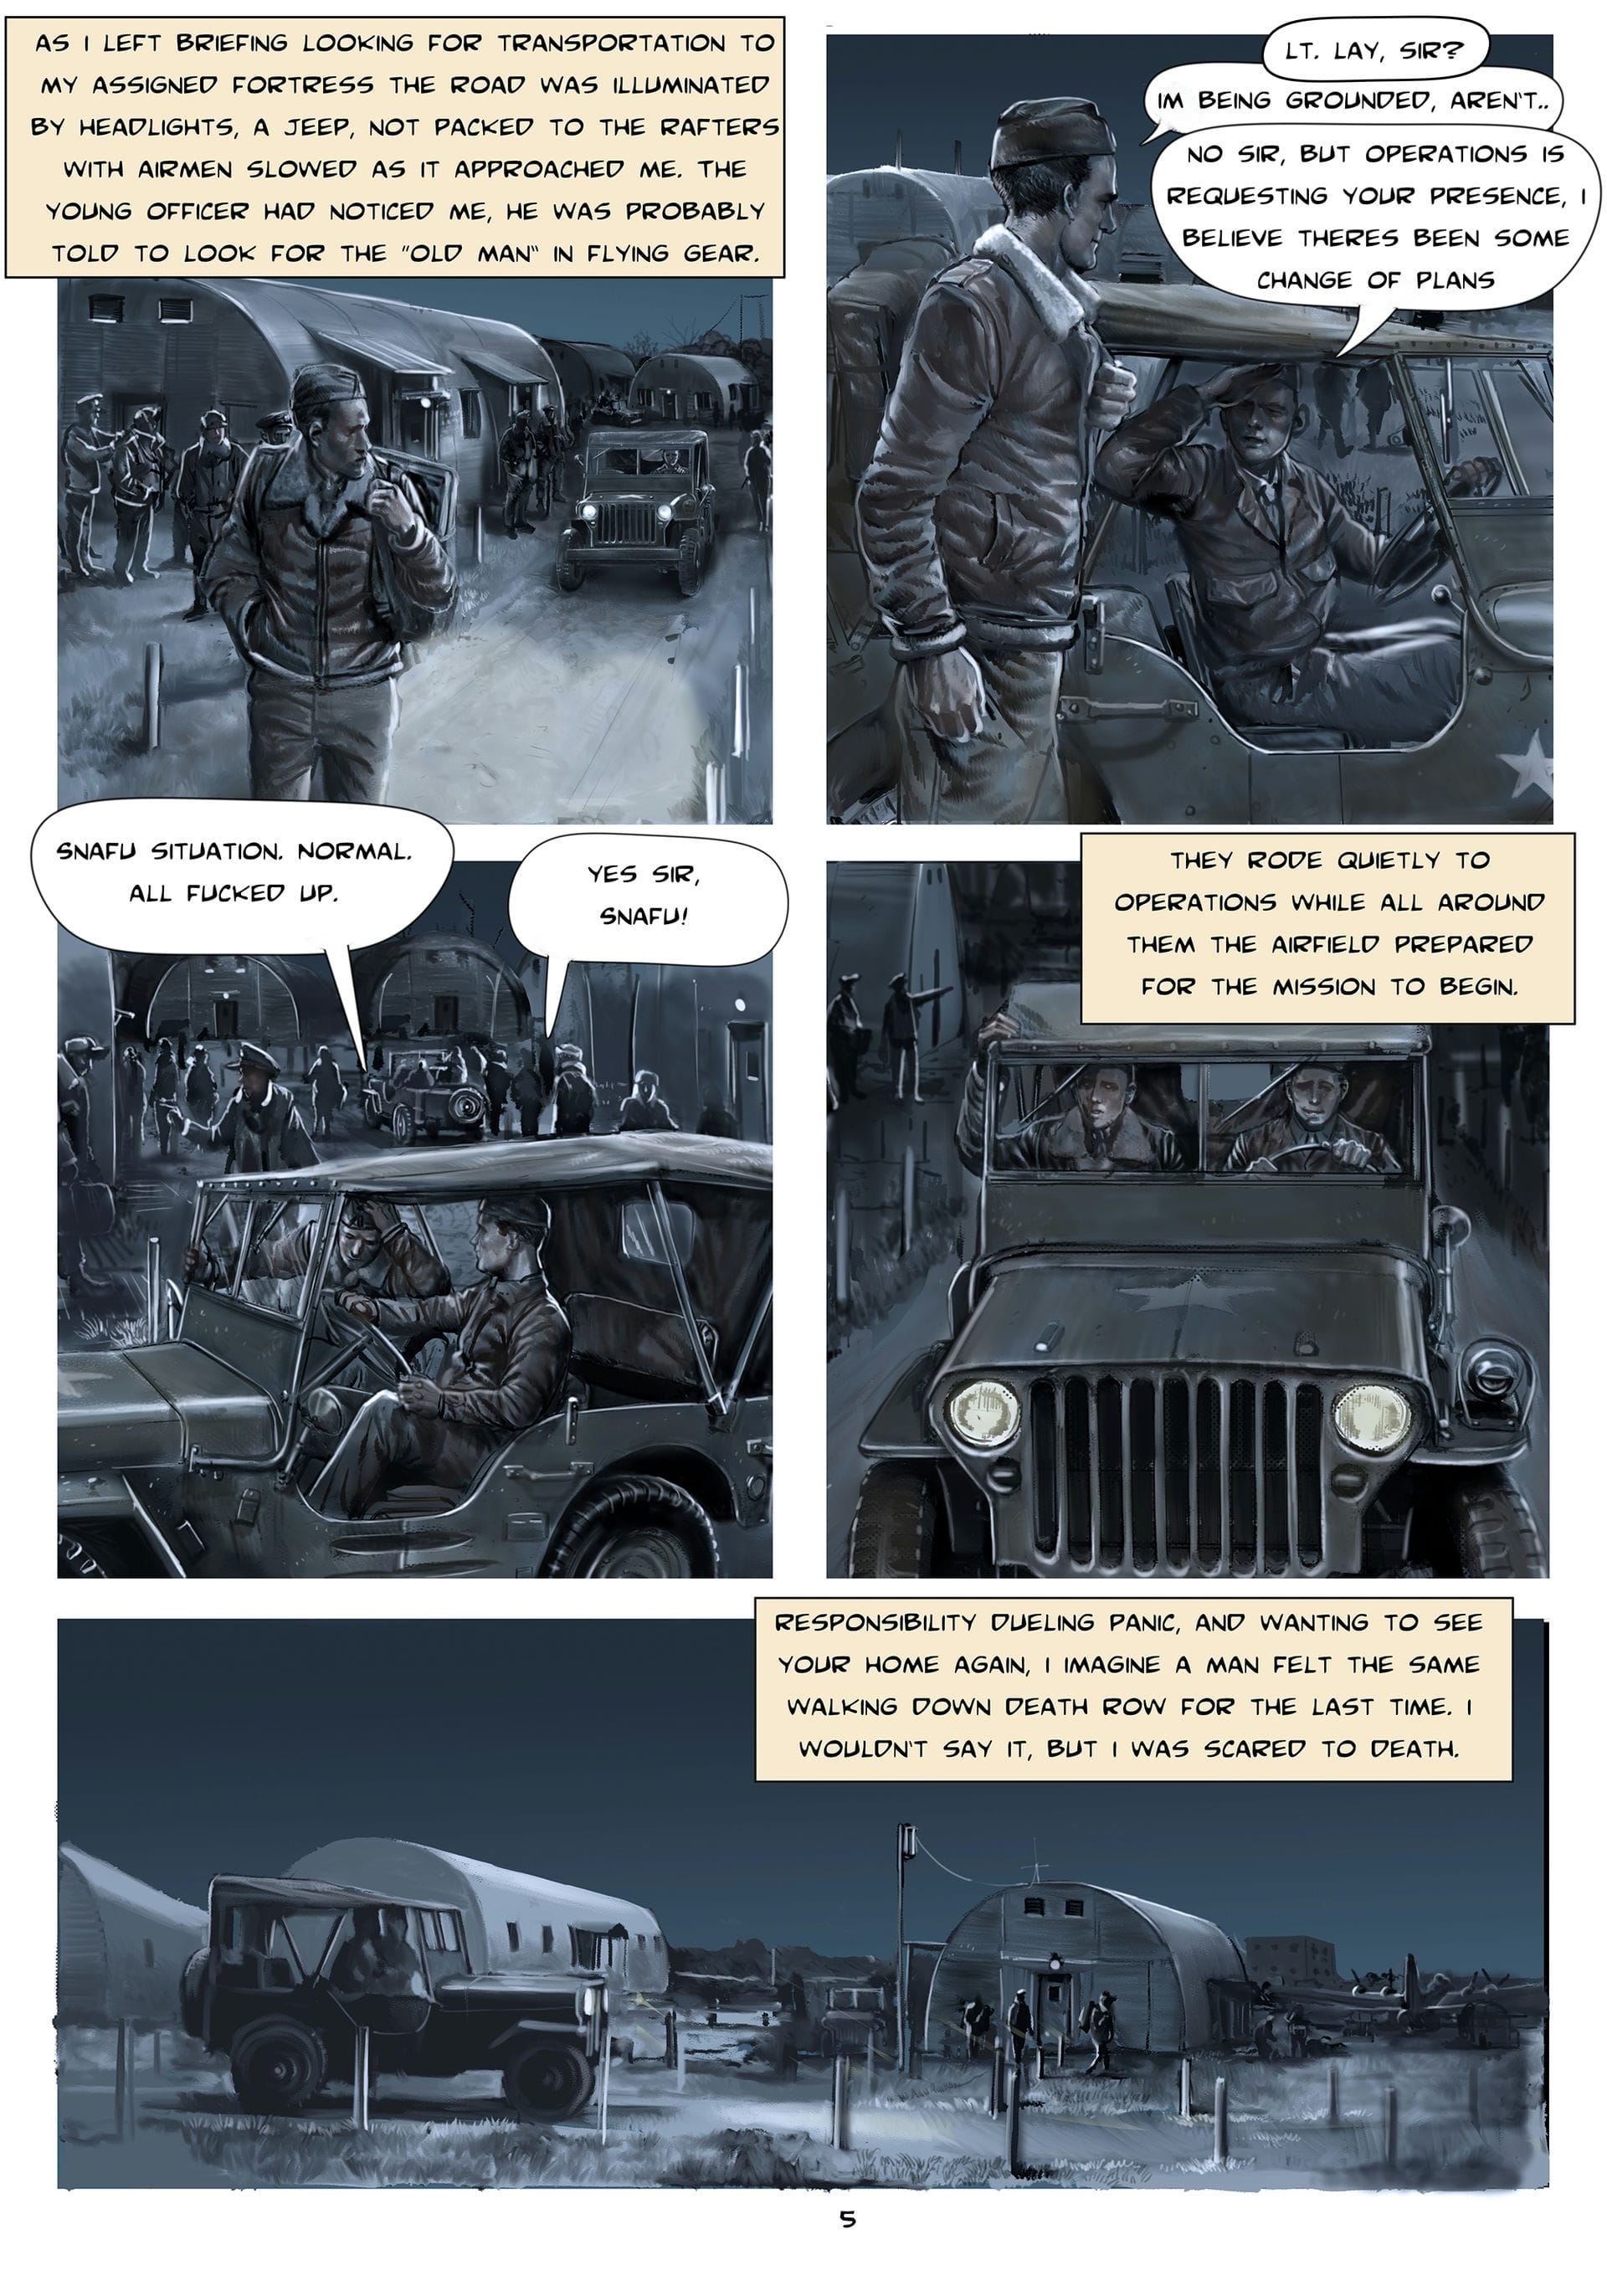 B-17 The Mighty 8th Redux - Comics - Page 5